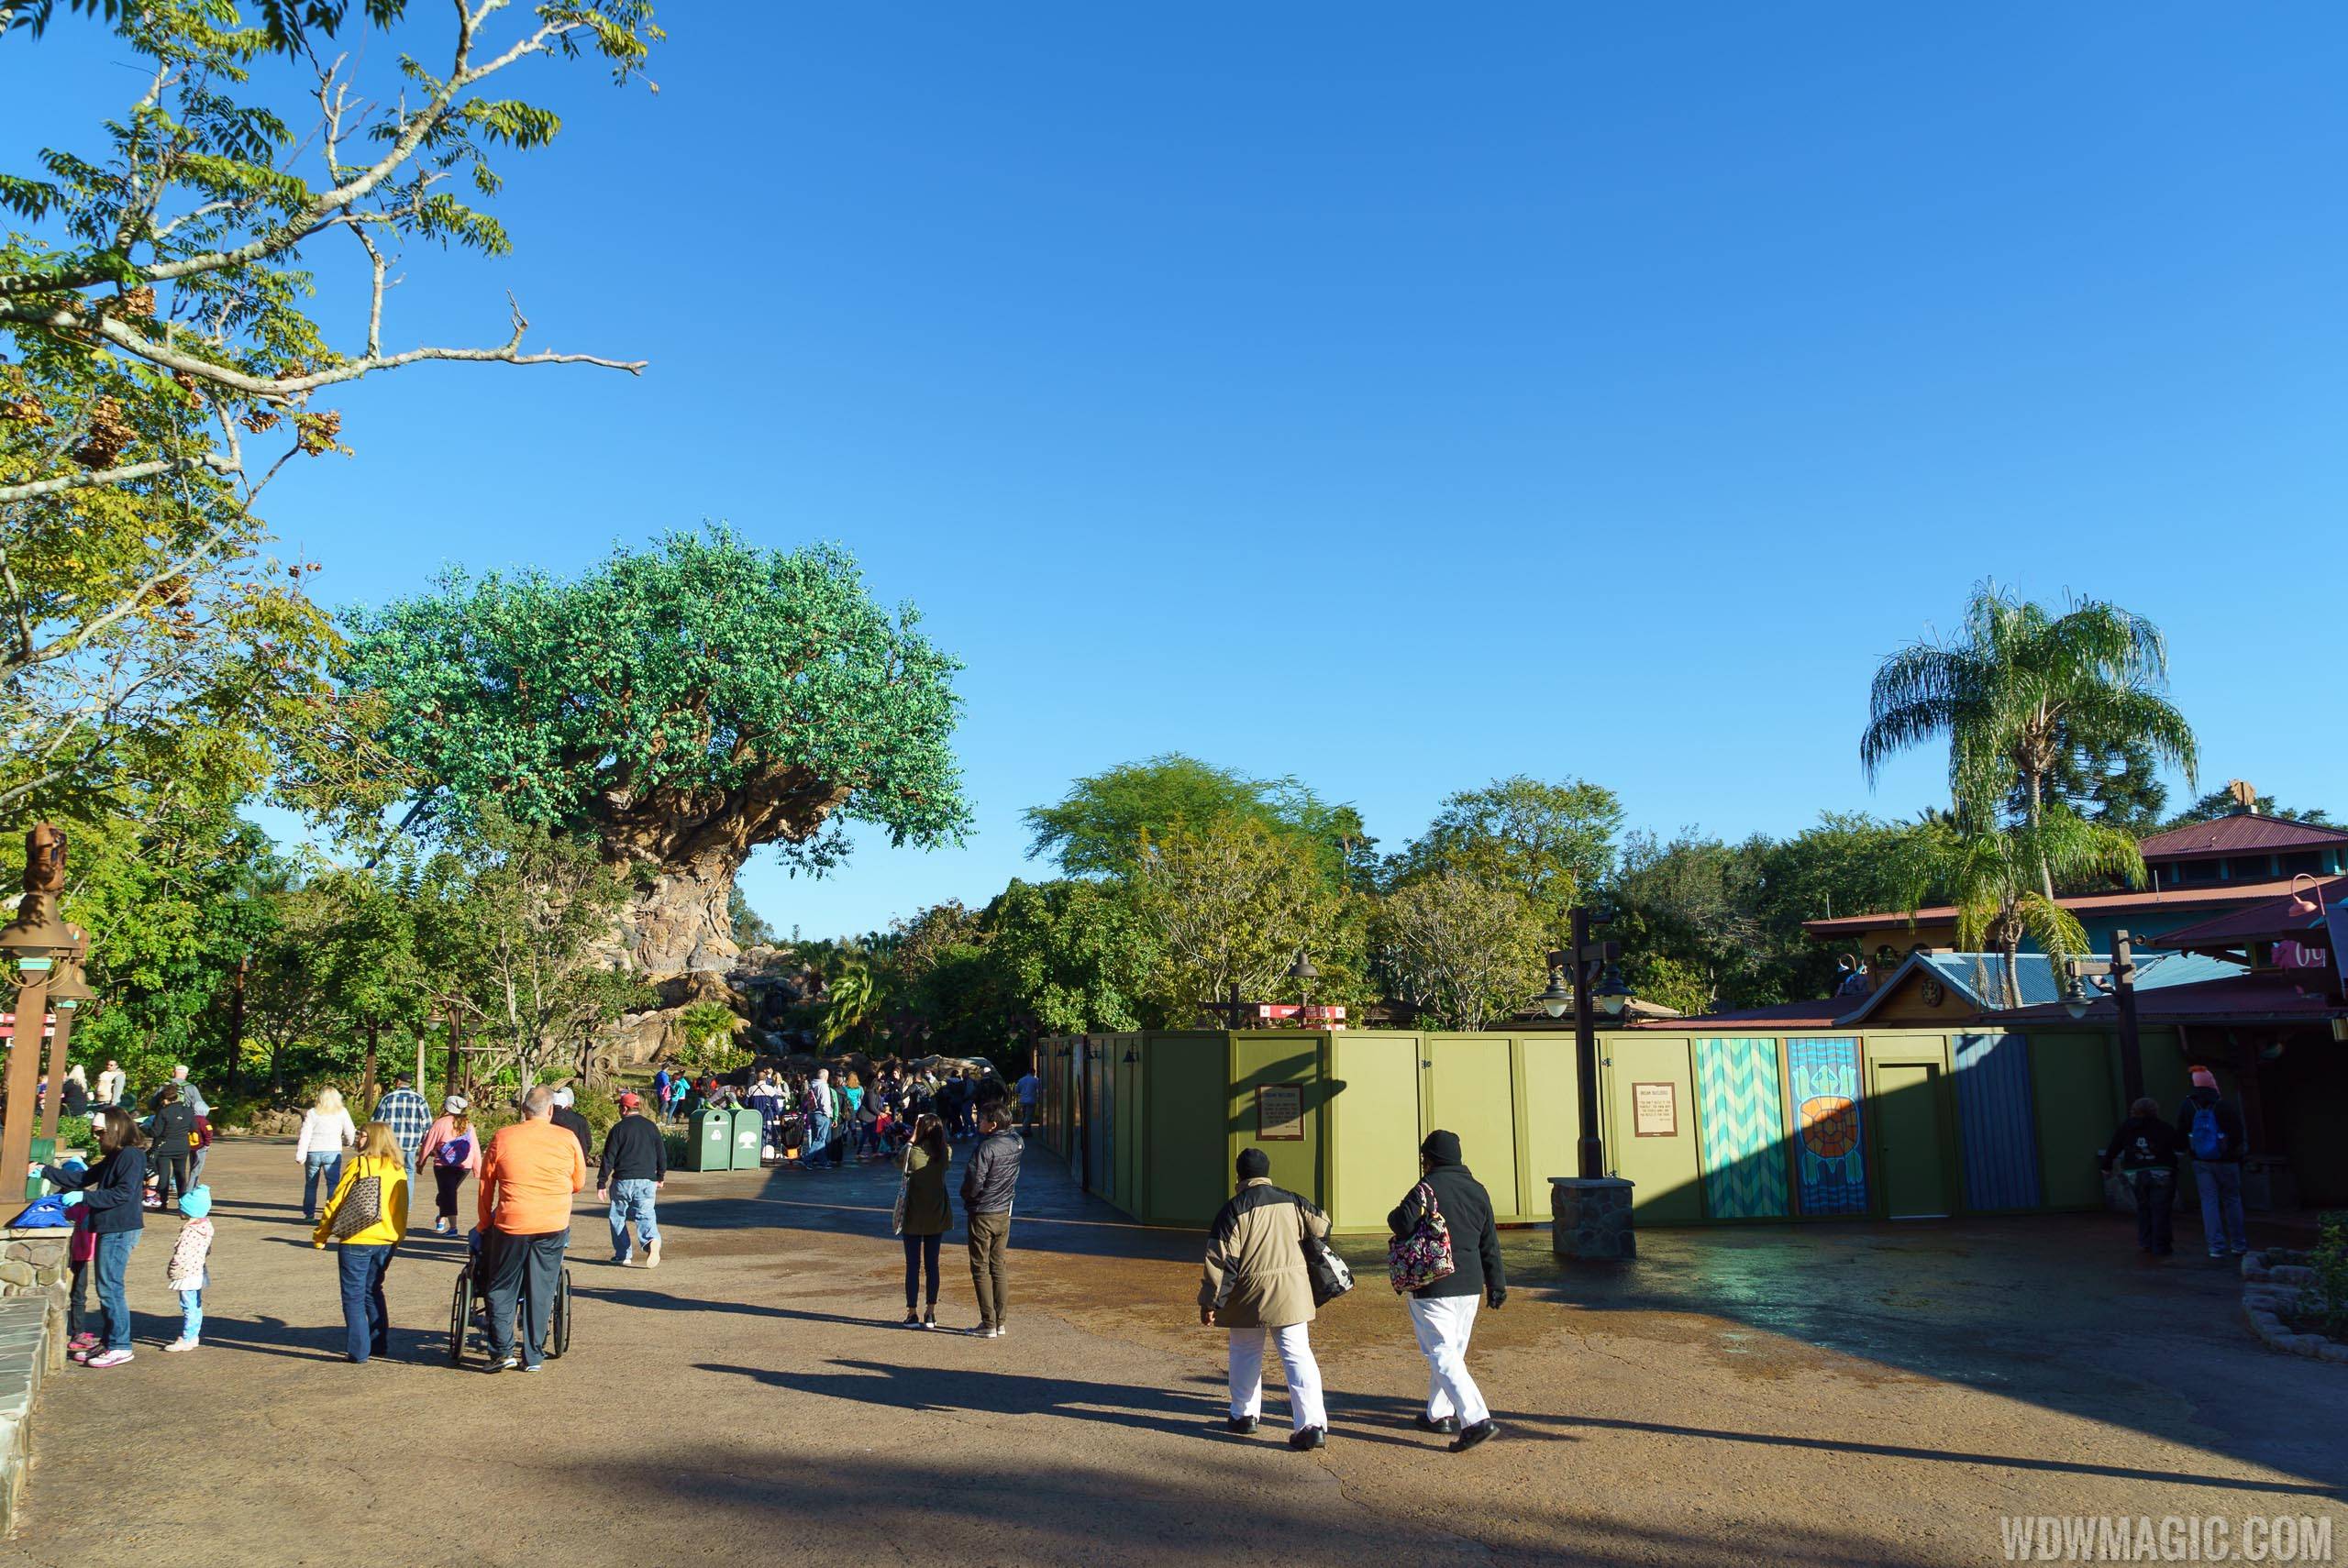 PHOTOS - Disney Outfitters walled off for refurbishment at Disney's Animal Kingdom